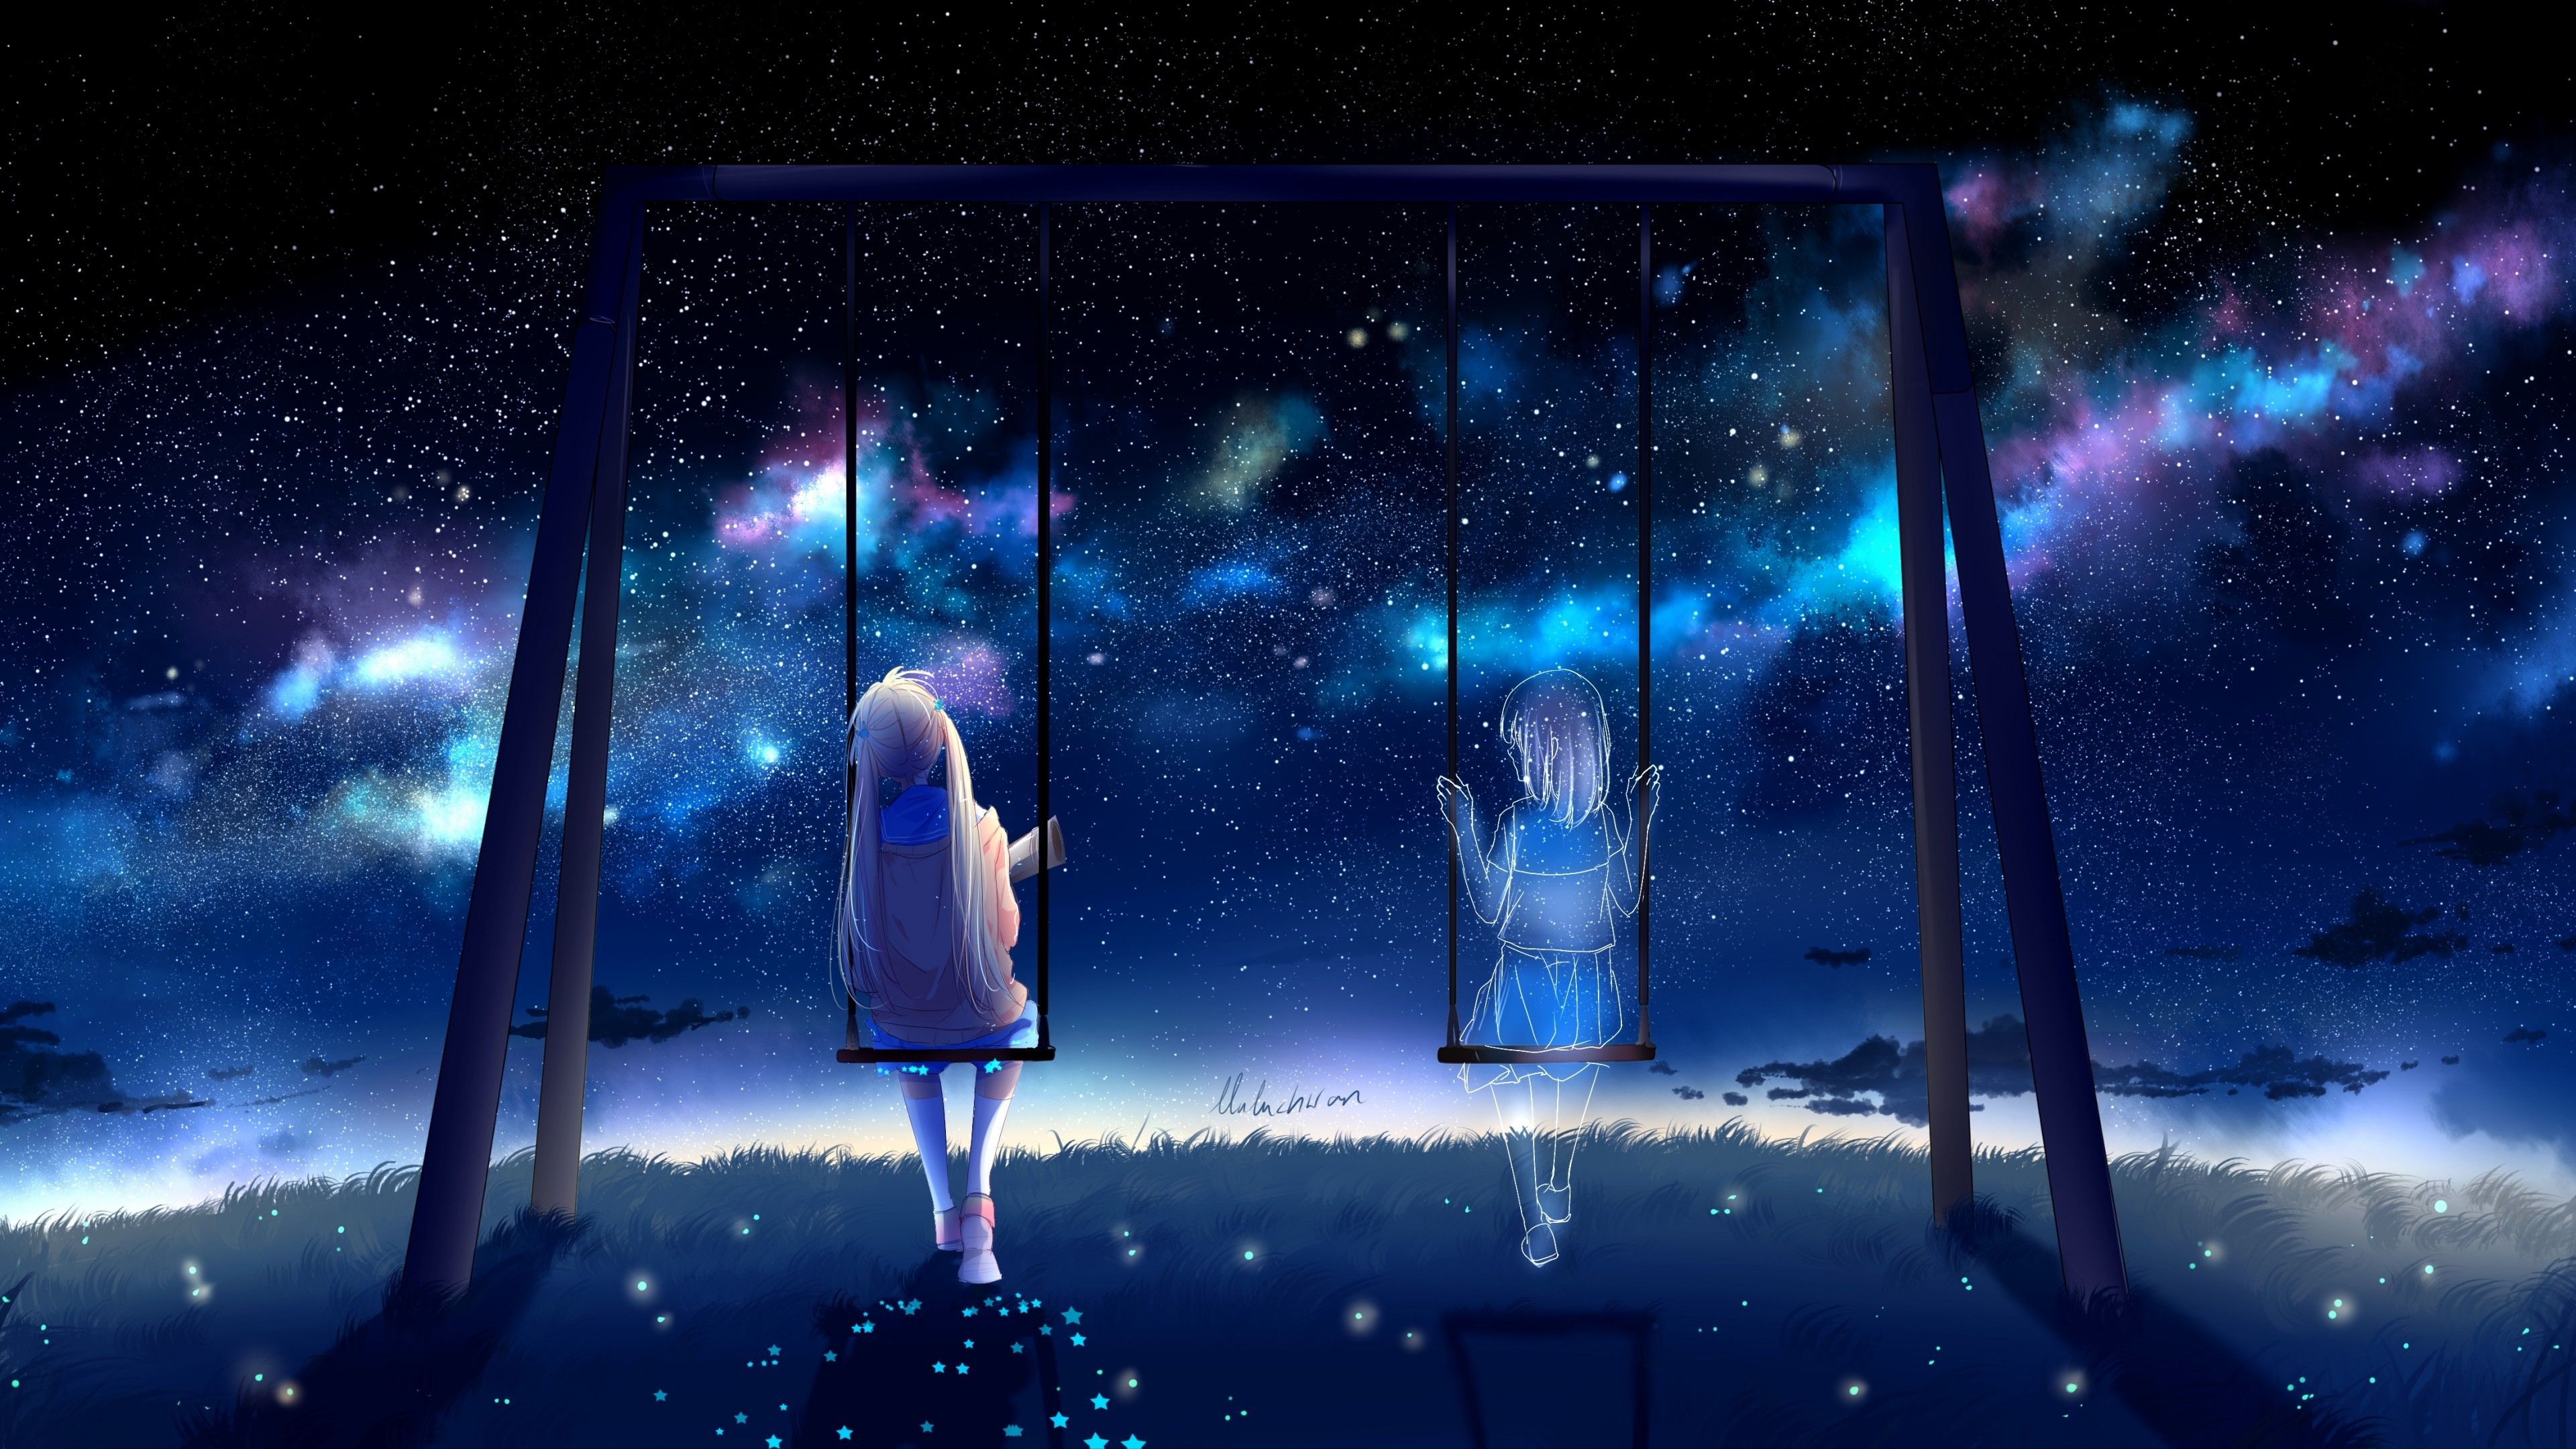 Download 3840x2160 Anime Girls, Swing, Friends, Stars, Lonely, Sky